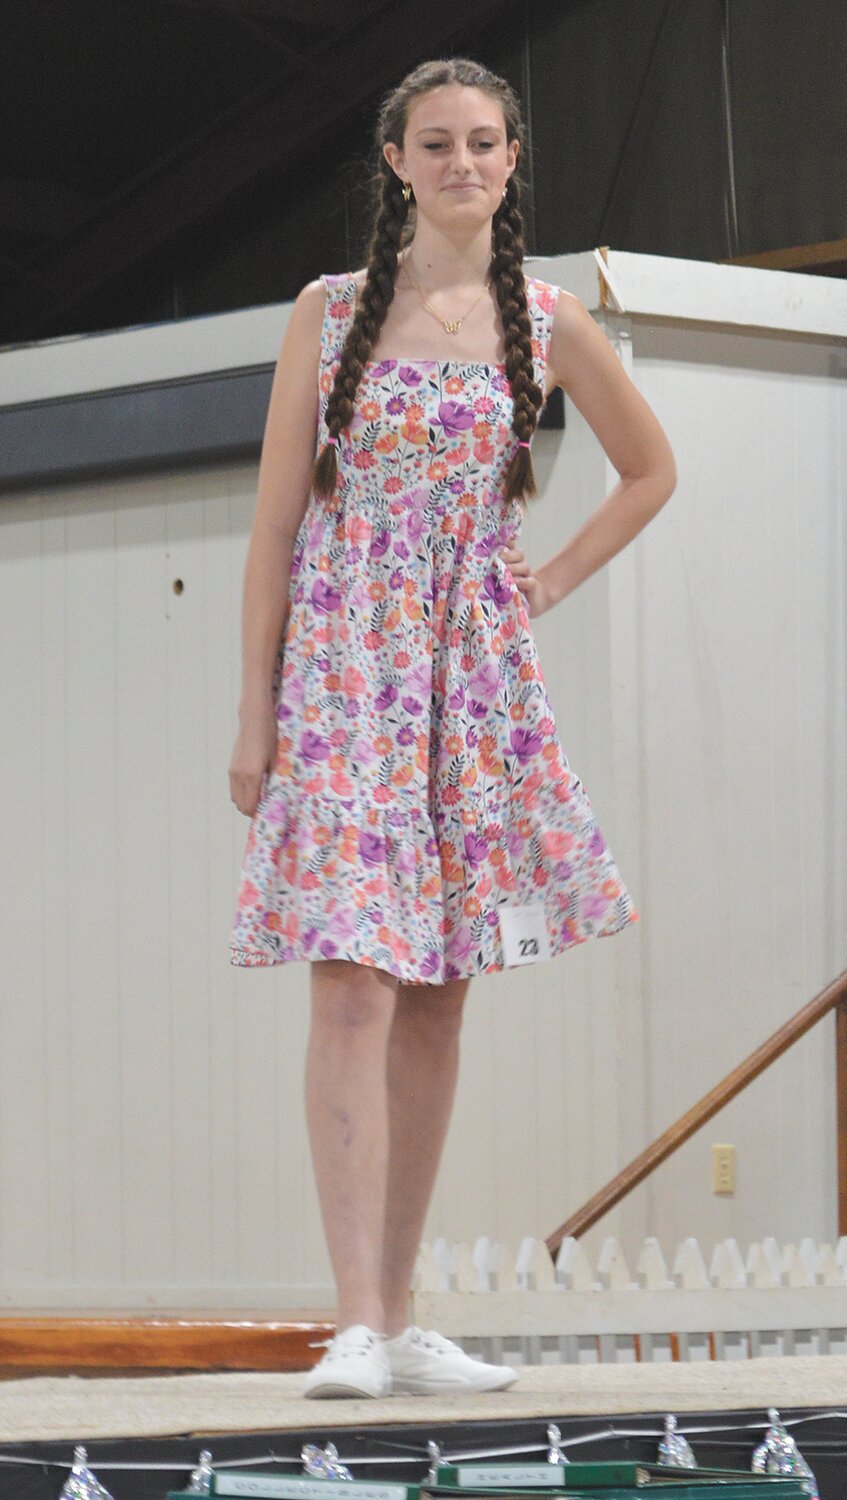 Emily Campbell models in the Grade 7 category of Fashion Revue.